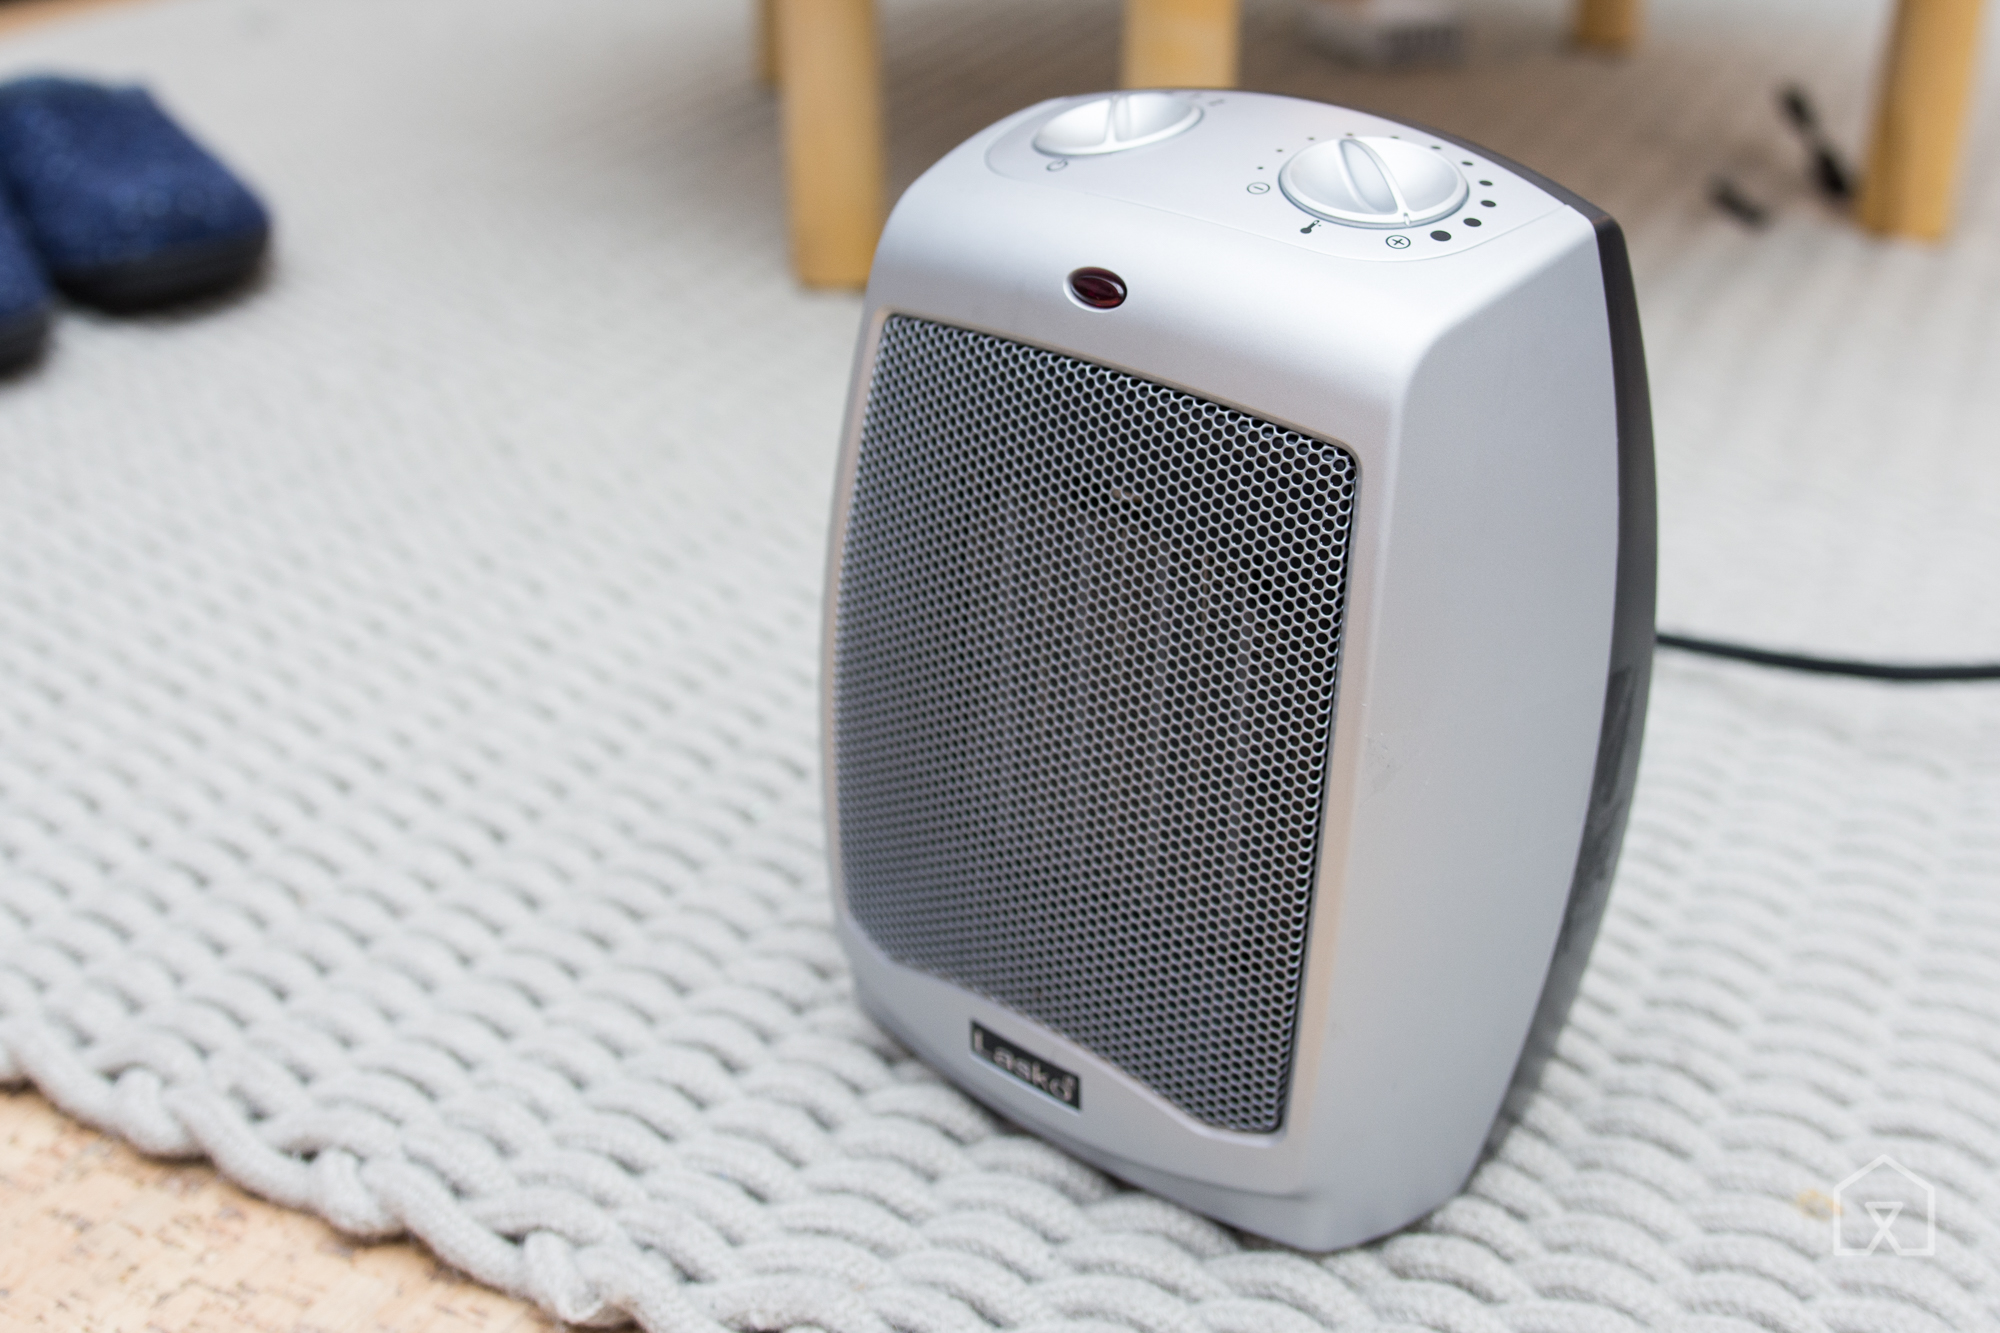 The best space heater